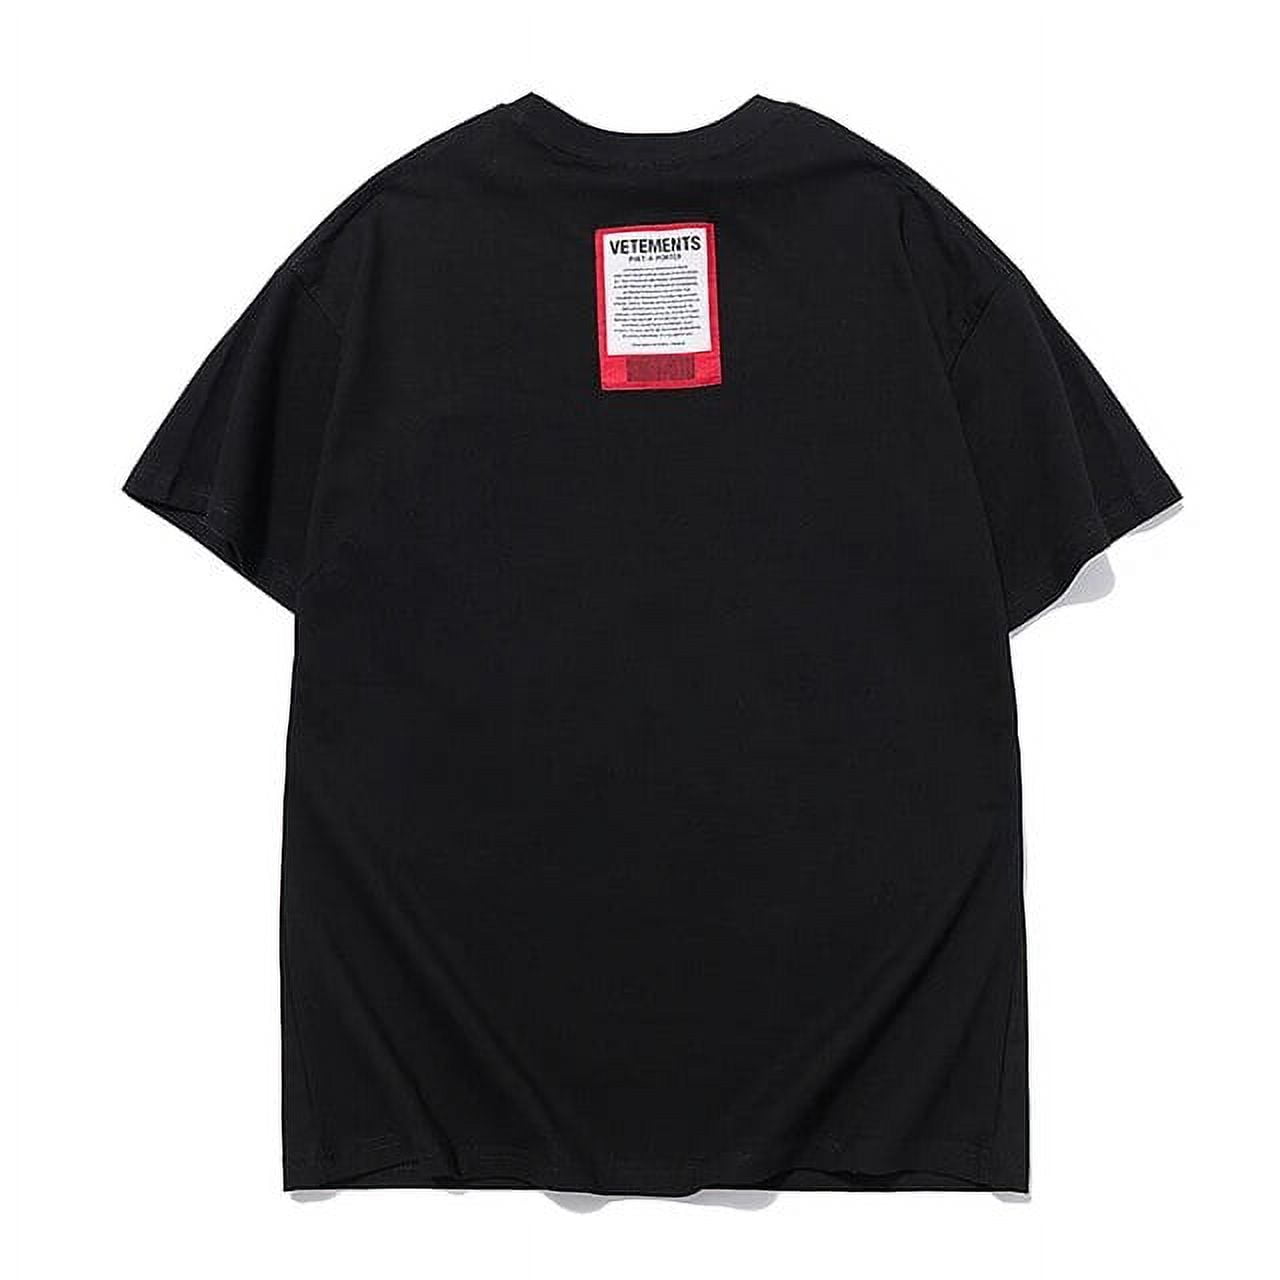 Streetwear Hip Hop Oversize Vetements Short Sleeve Tee Big Tag Patch VTM  T-shirts Embroidery Black White Red Vetements T Shirt